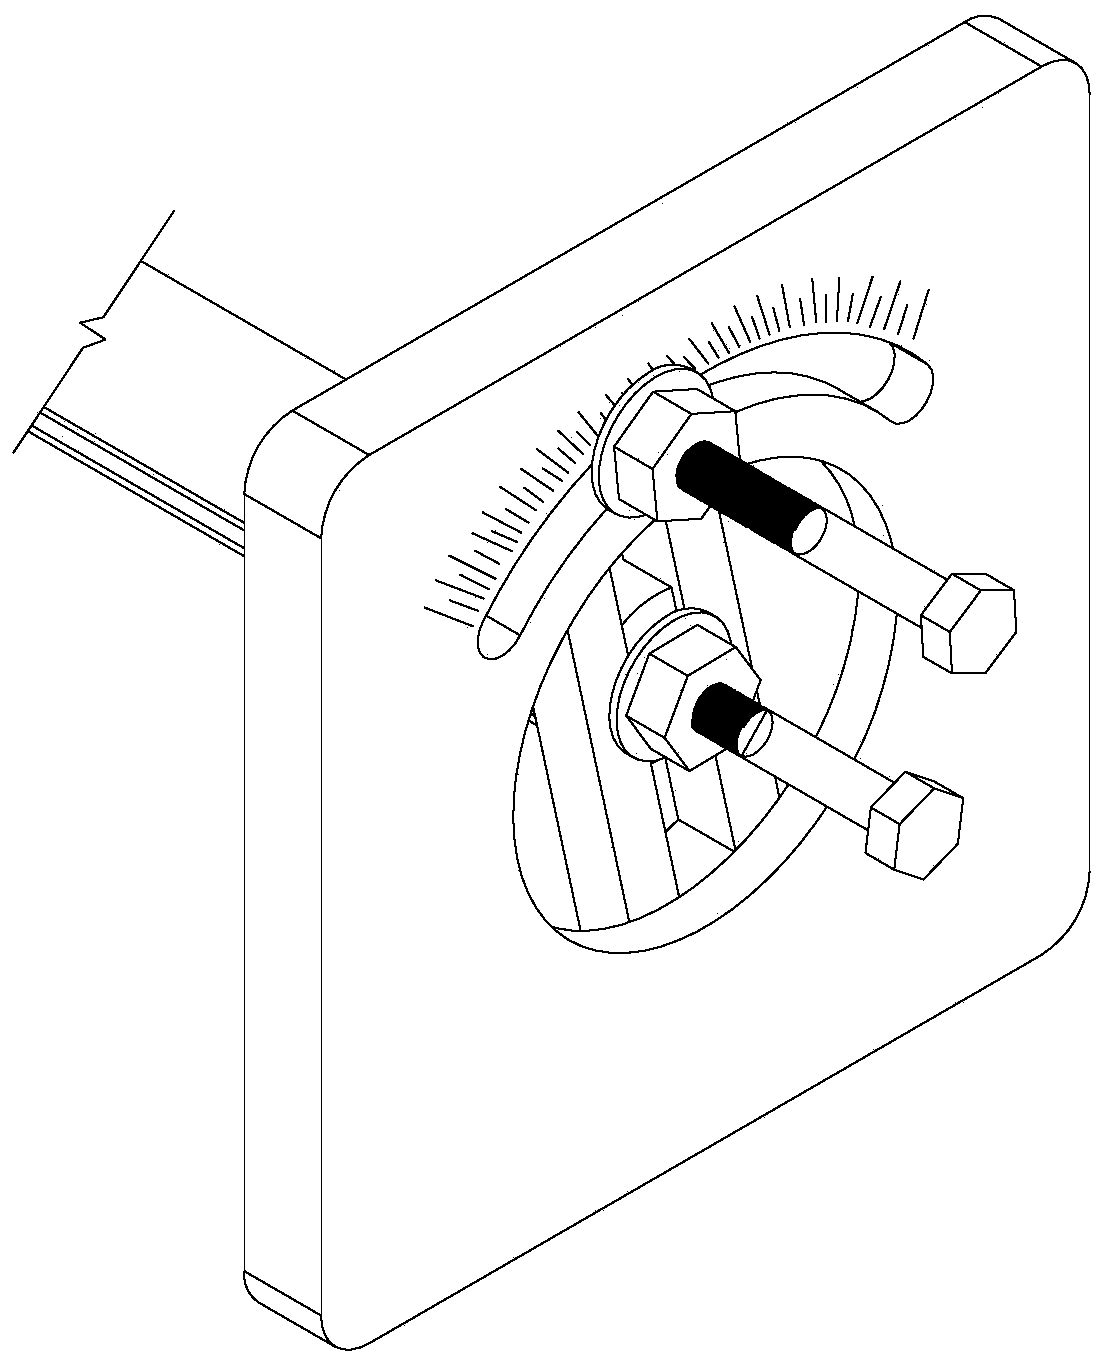 Film cutter capable of being adjusted in multiple directions